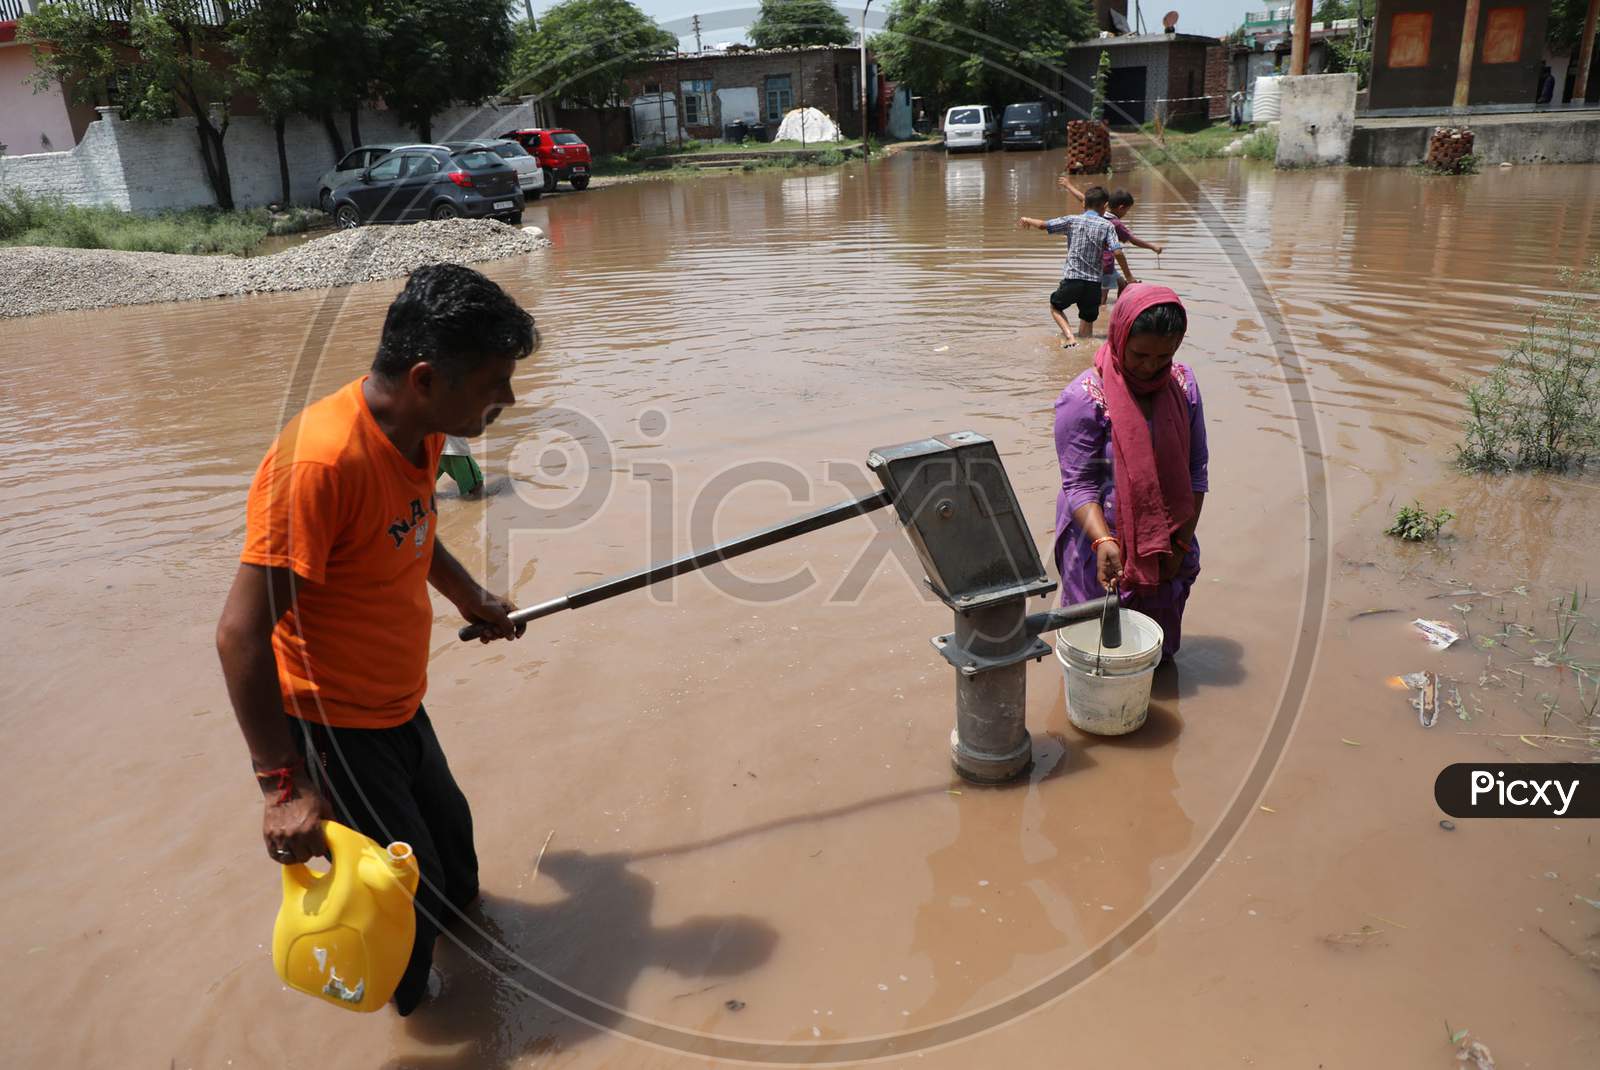 A Woman collects drinking water from a hand pump at a flooded street following monsoon rains on the outskirts in Jammu on July 29, 2020.